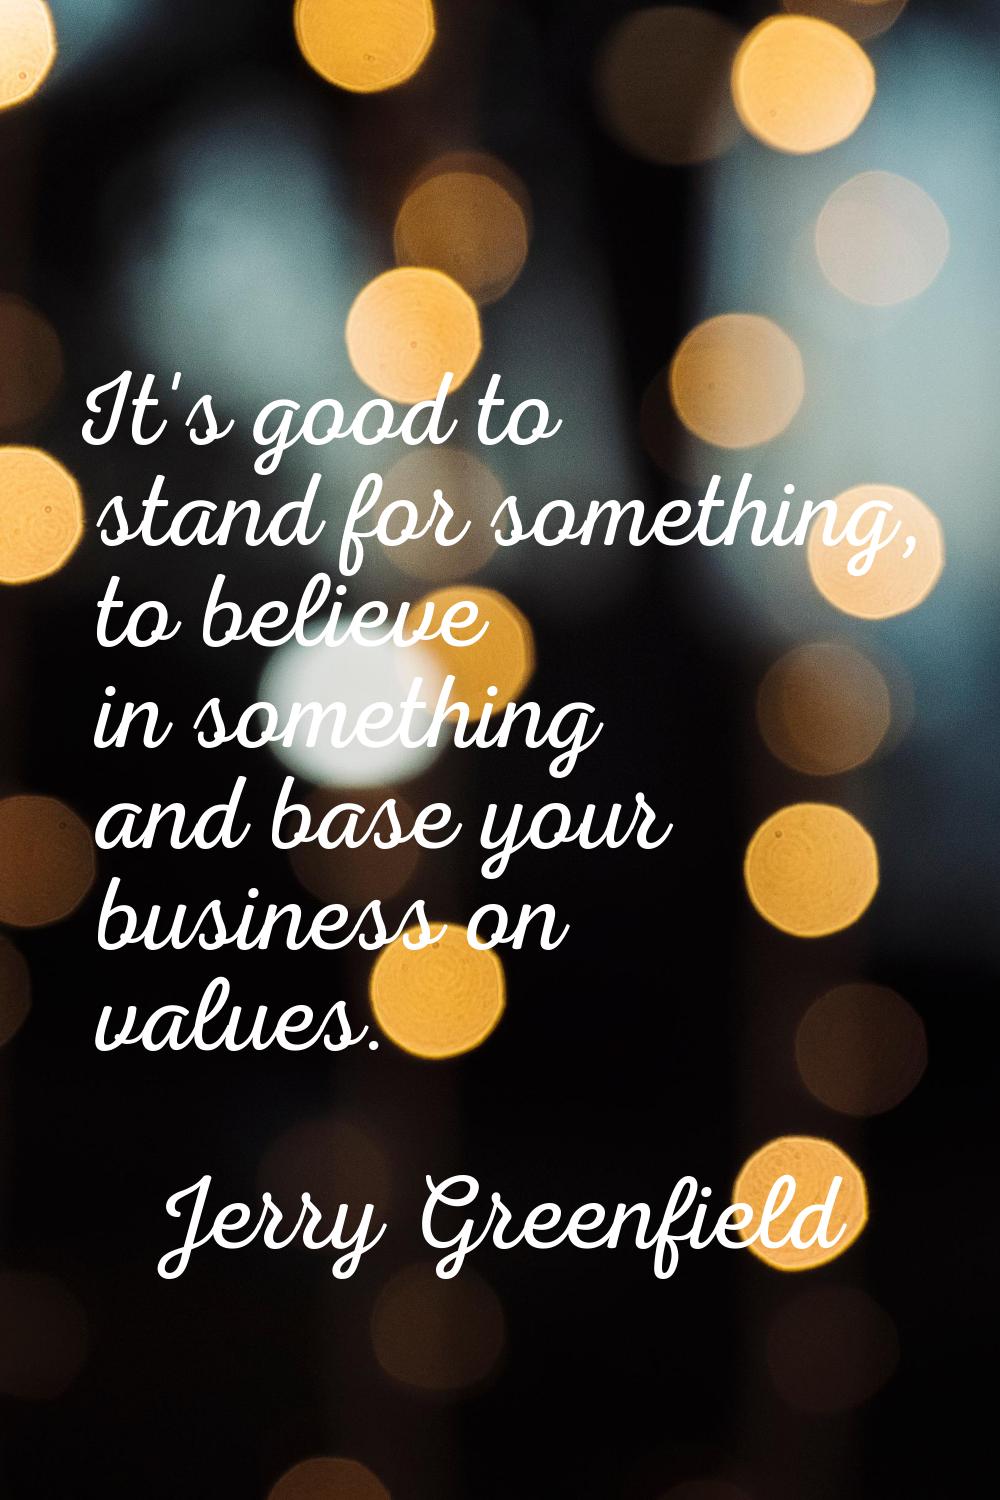 It's good to stand for something, to believe in something and base your business on values.